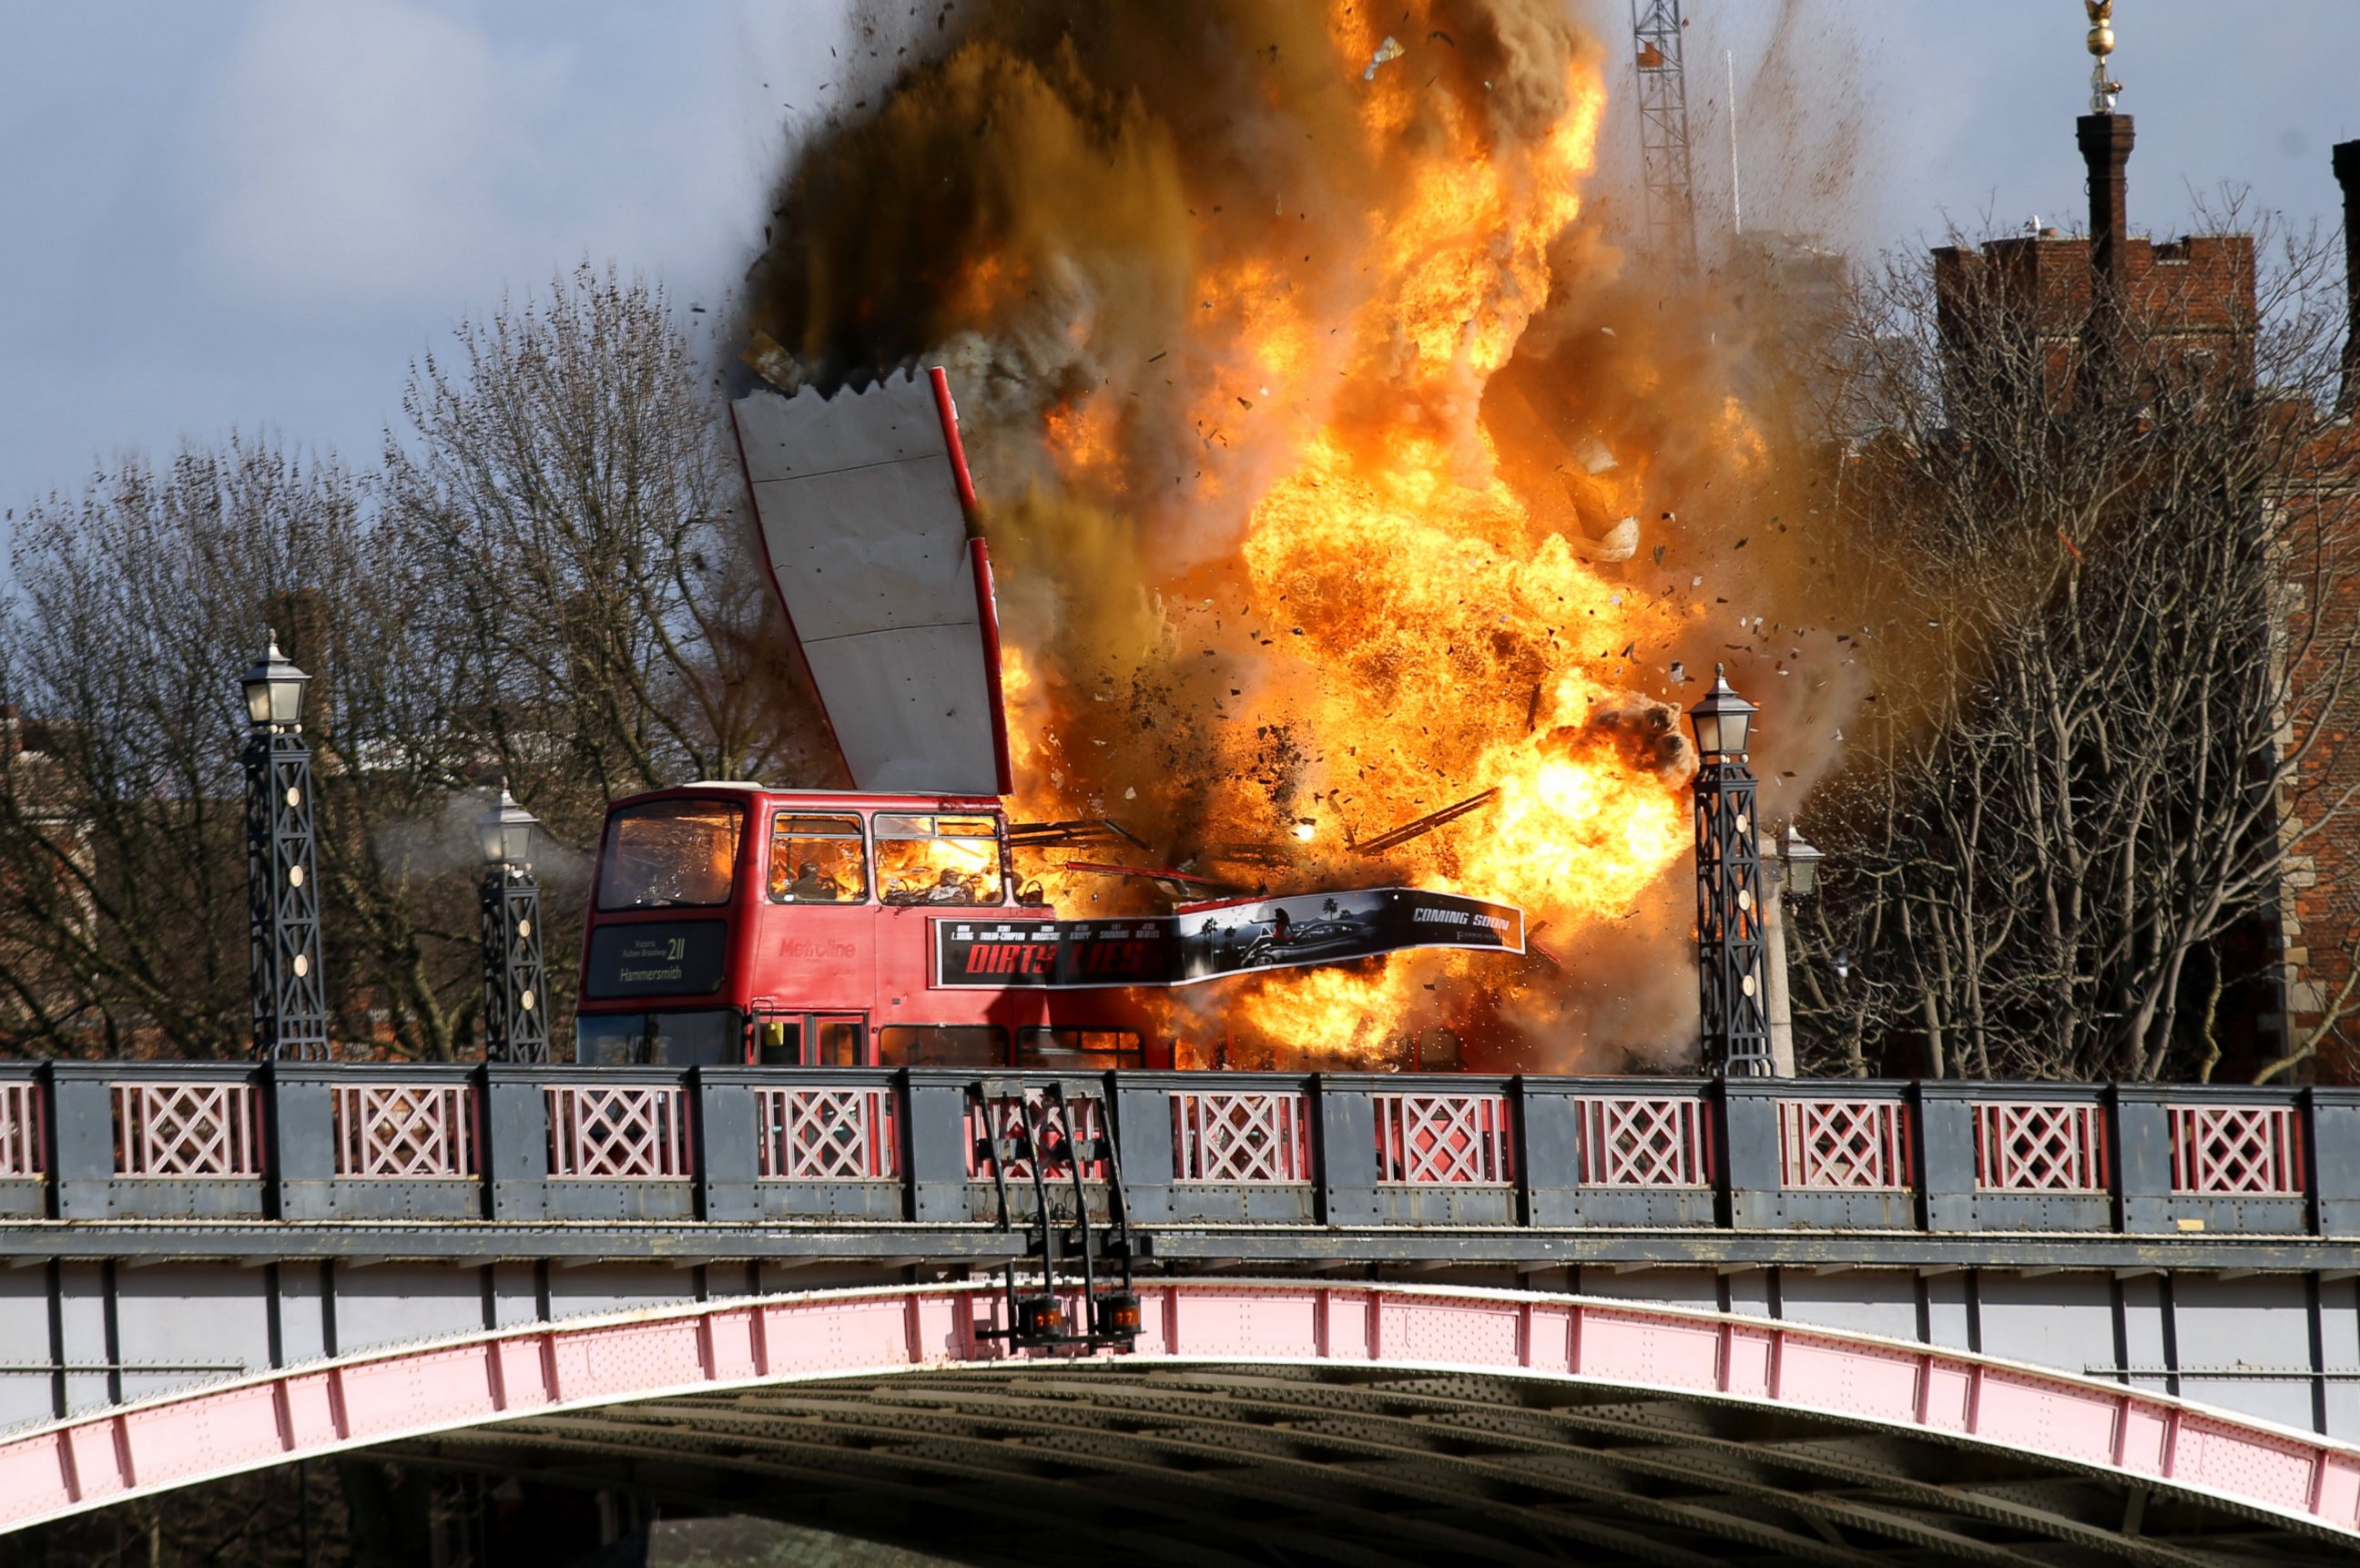 PHOTO: A bus explodes on Lambeth Bridge, during filming for Jackie Chan's new film "The Foreigner" in London, Feb. 7, 2016.  